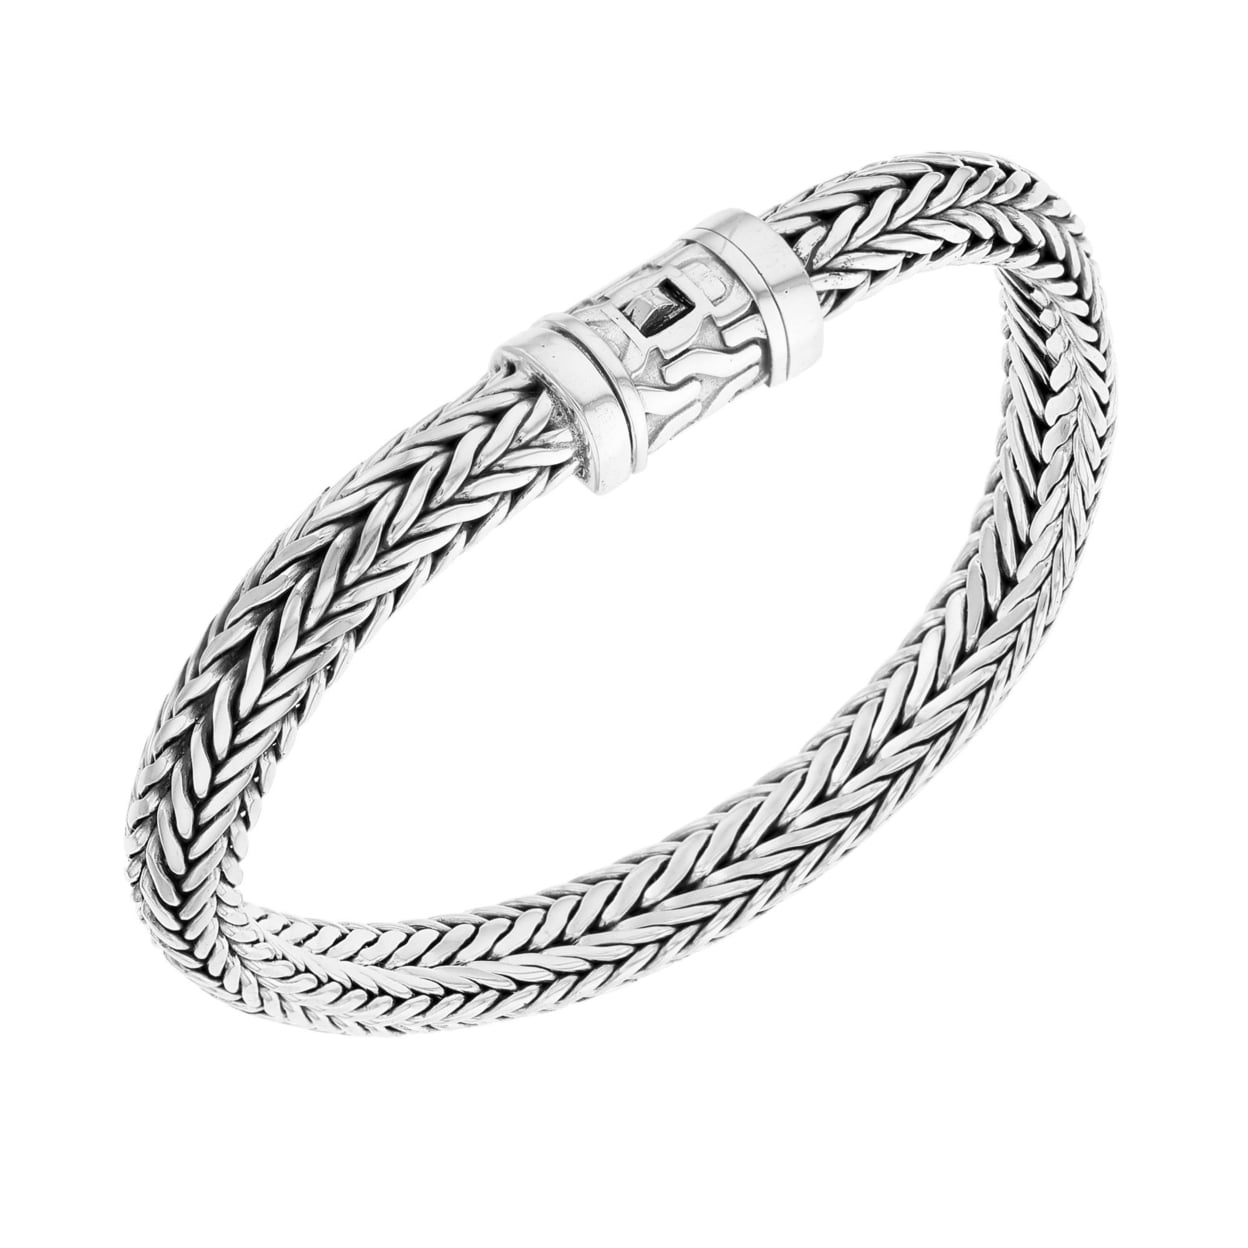 Baronyka Men's Thick Rope Silver Chain Bracelet